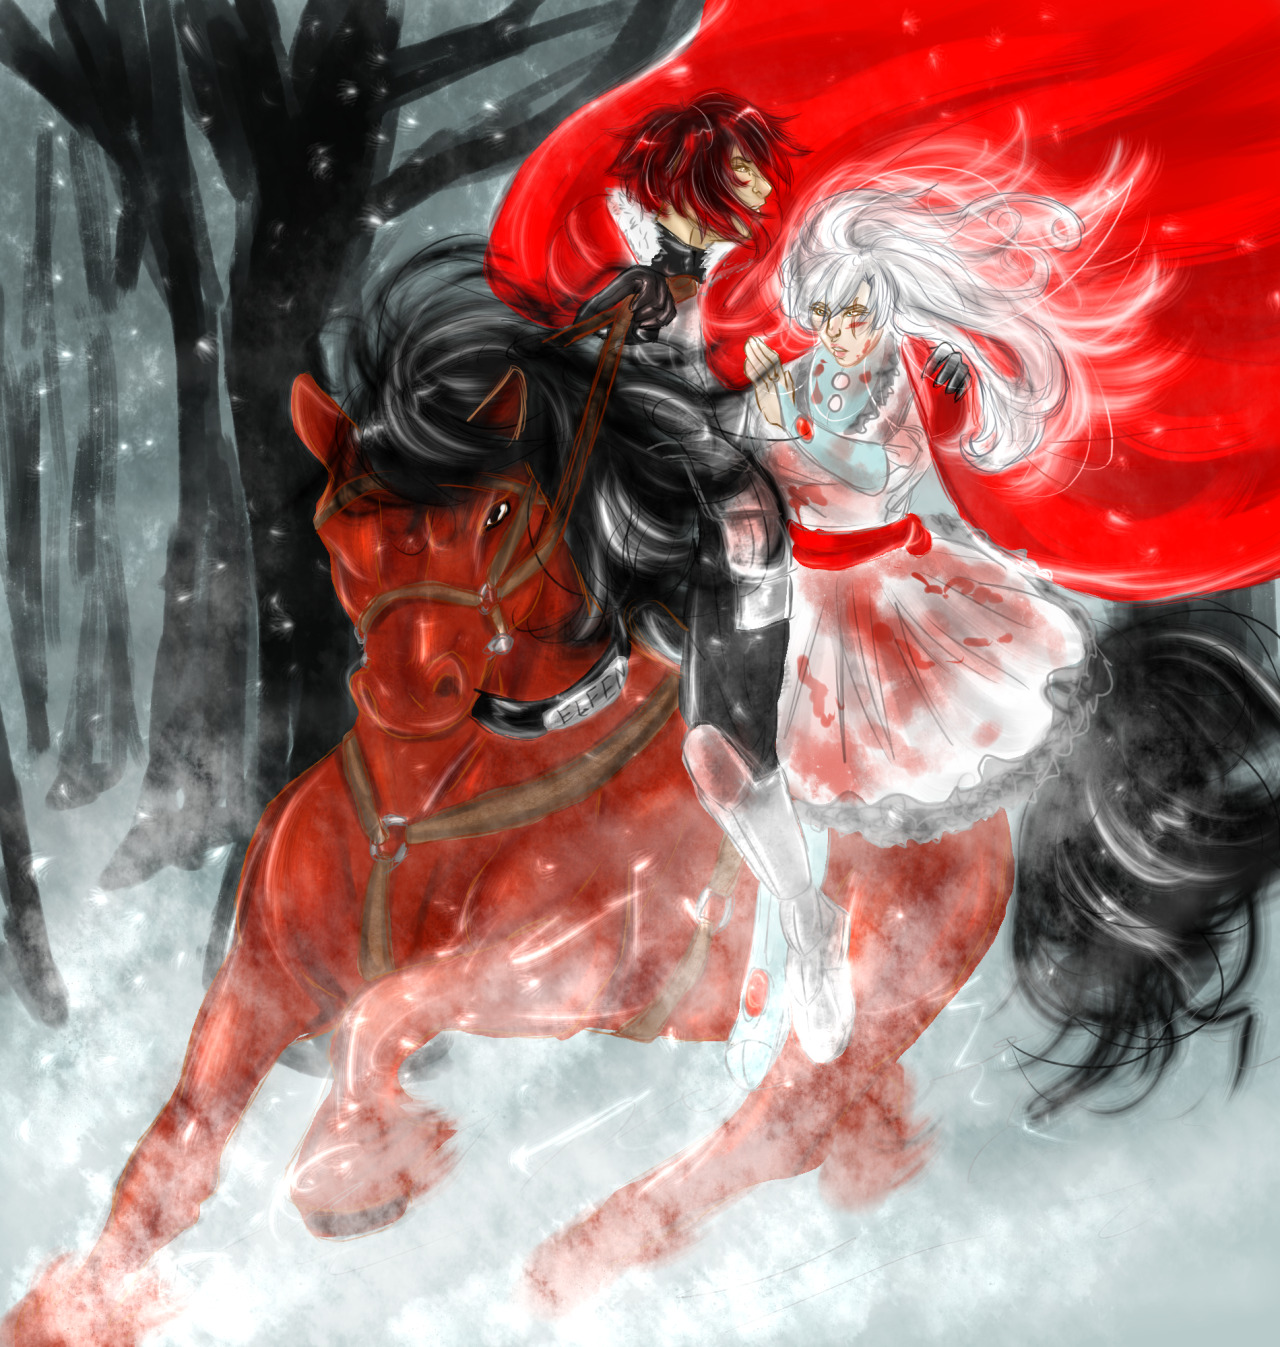 Knight Ruby saveing Queen (Heiress actually coUGH) Weiss from a castel seige. Dedicated